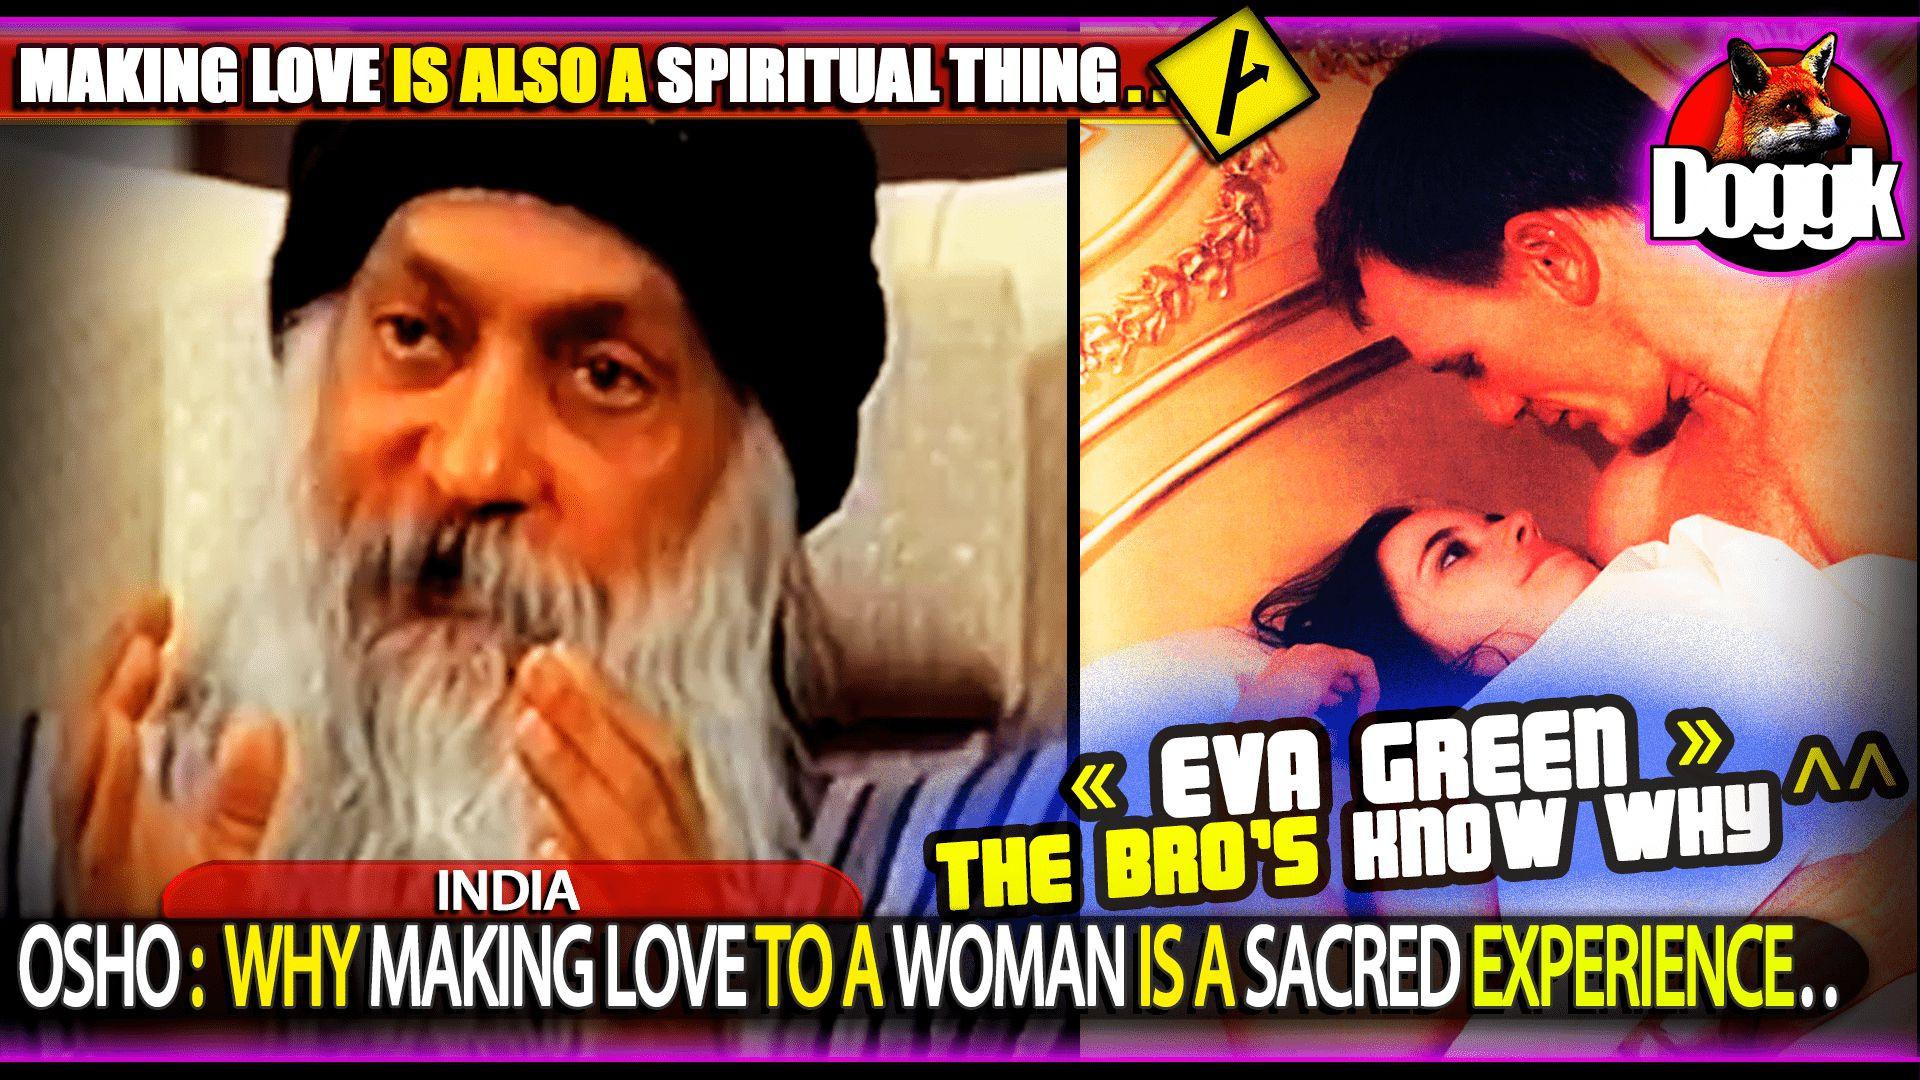 ⁣⁣⁣⁣⁣⁣⁣⁣⁣⁣⁣⁣⁣⁣⁣⁣⁣⁣⁣⁣⁣⁣⁣⁣⁣⁣⁣⁣⁣⁣⁣⁣⁣⁣⁣⁣⁣⁣⁣⁣⁣⁣⁣⁣▶ OSHO : WHY MAKING LOVE TO A WOMAN IS A SACRED EXPERIENCE.. (INDIA)